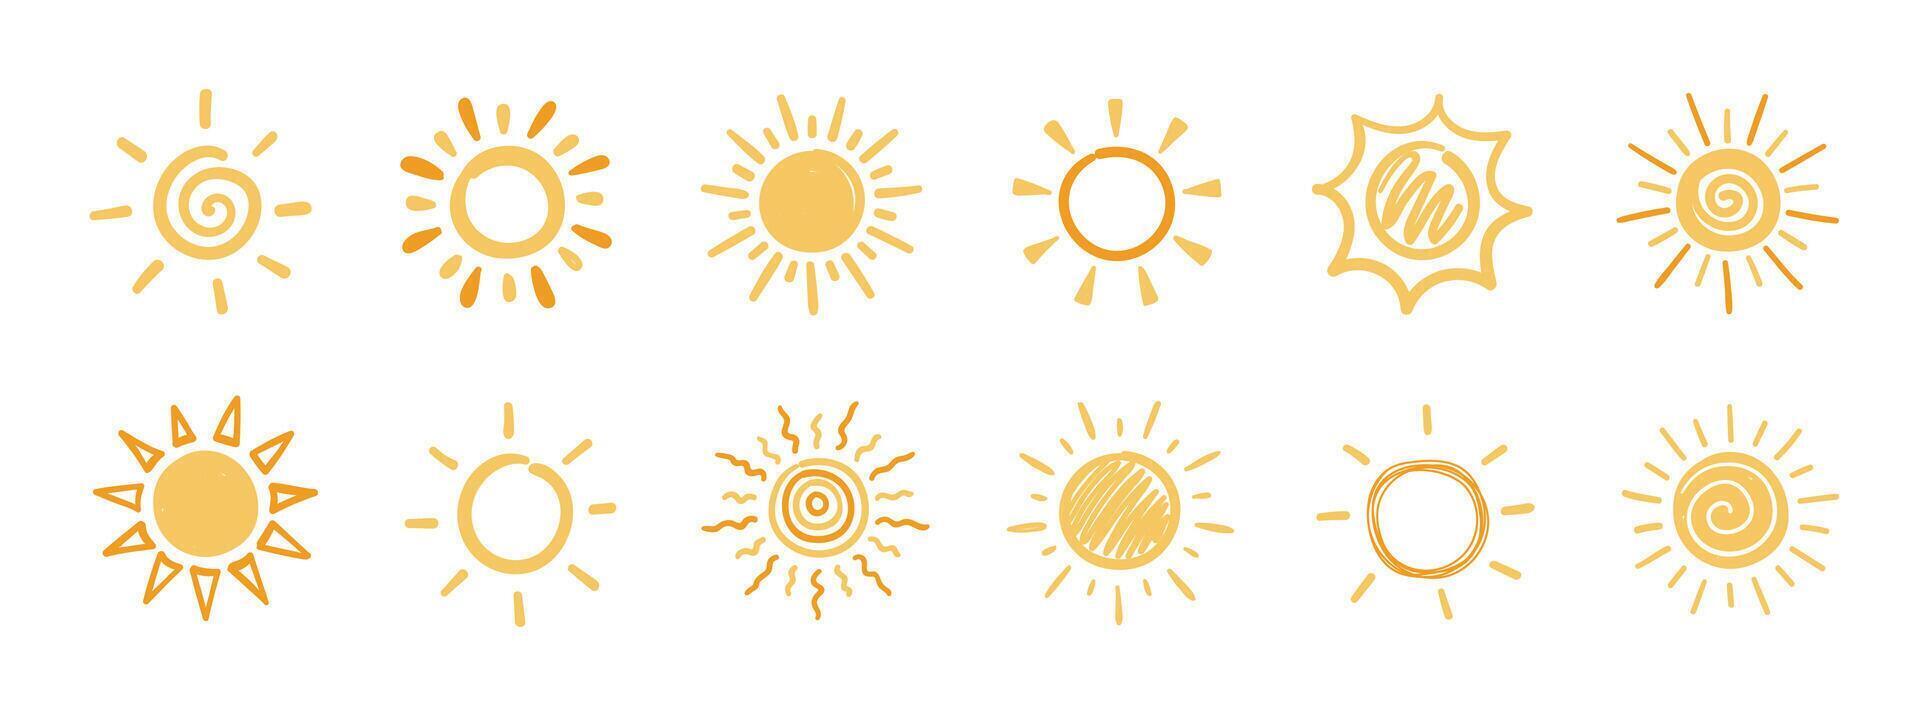 Cute doodle sun set. Set of illustrations in hand drawn style. vector